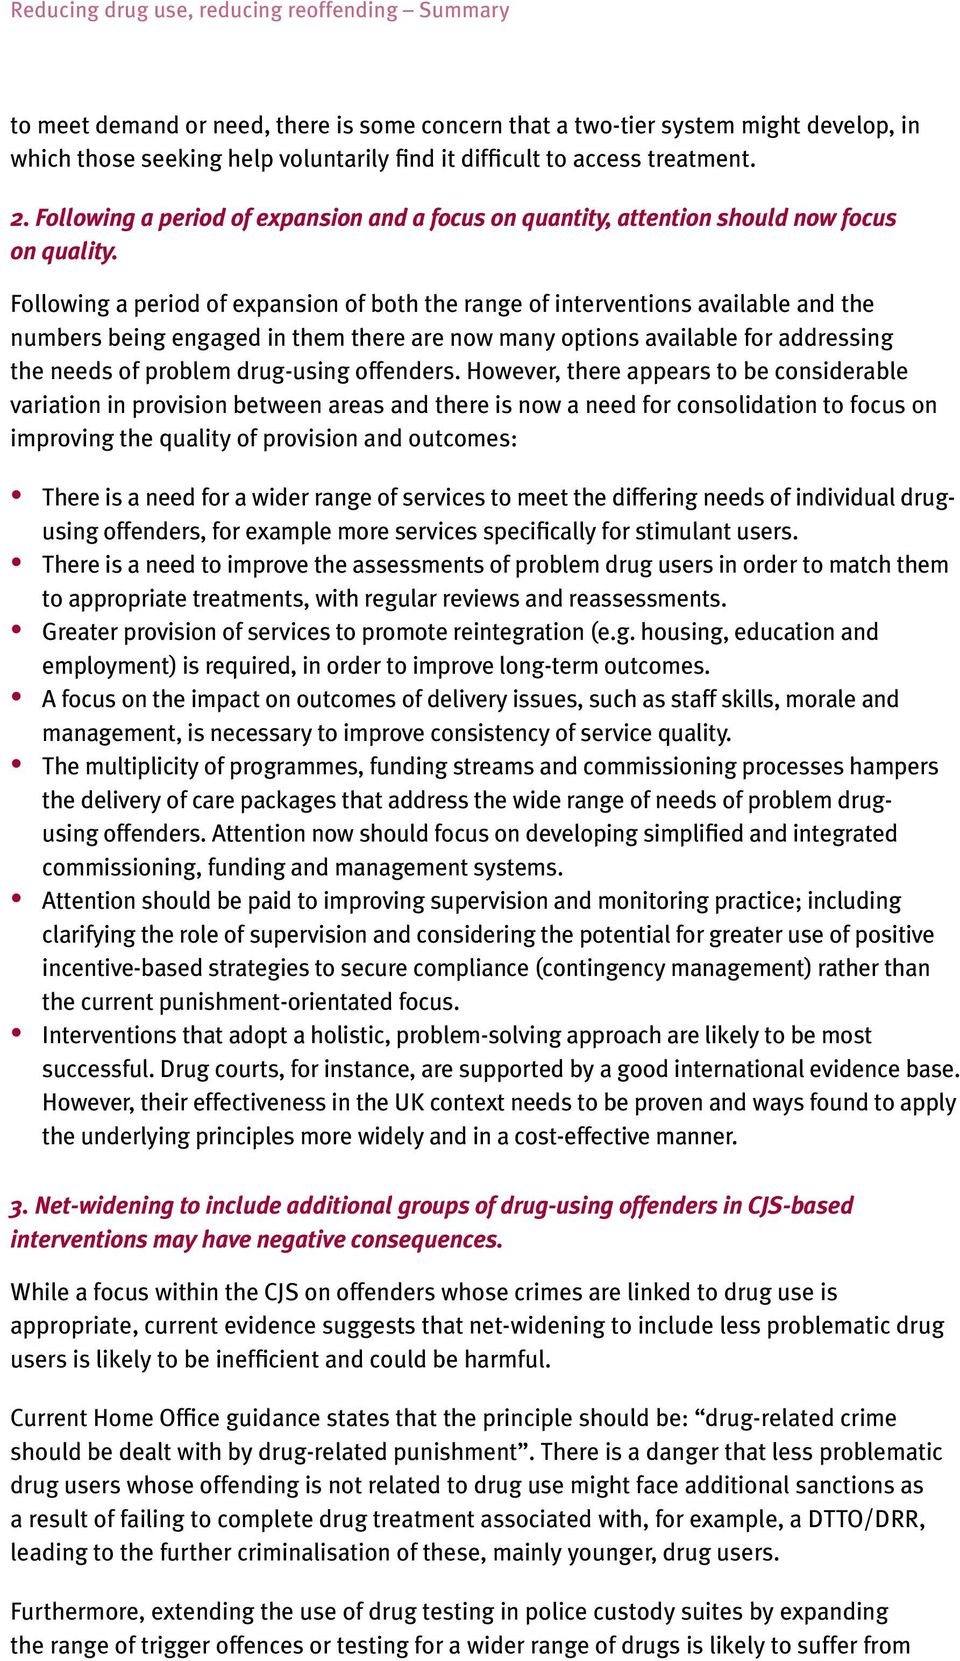 Following a period of expansion of both the range of interventions available and the numbers being engaged in them there are now many options available for addressing the needs of problem drug-using